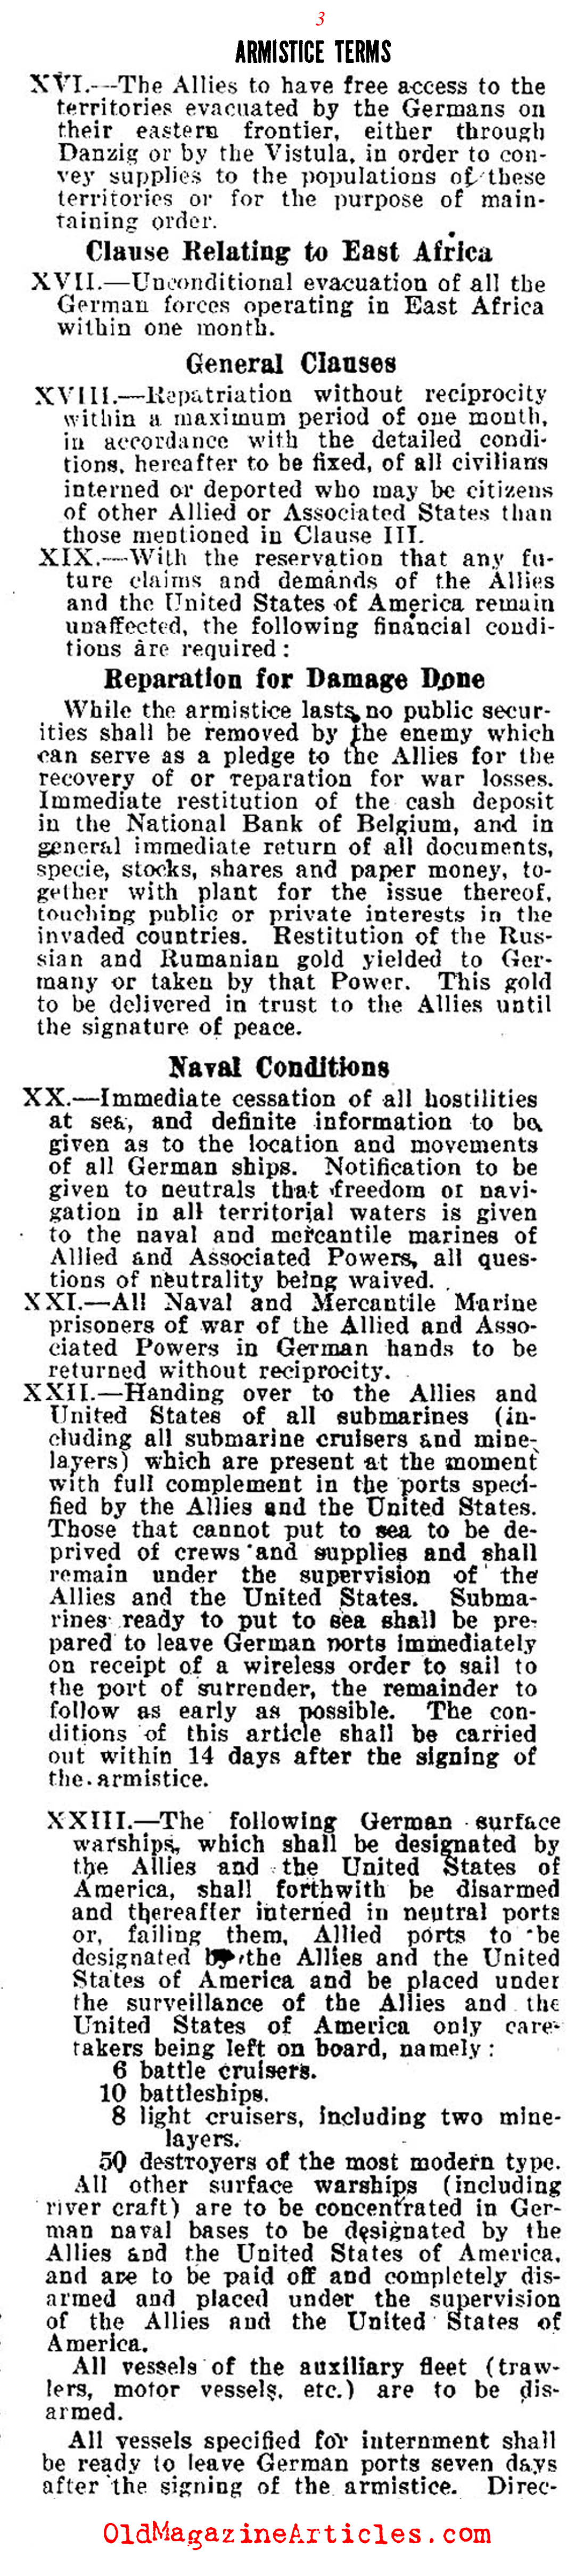 The Demands of the 1918 Armistice (The Stars and Stripes, 1918)